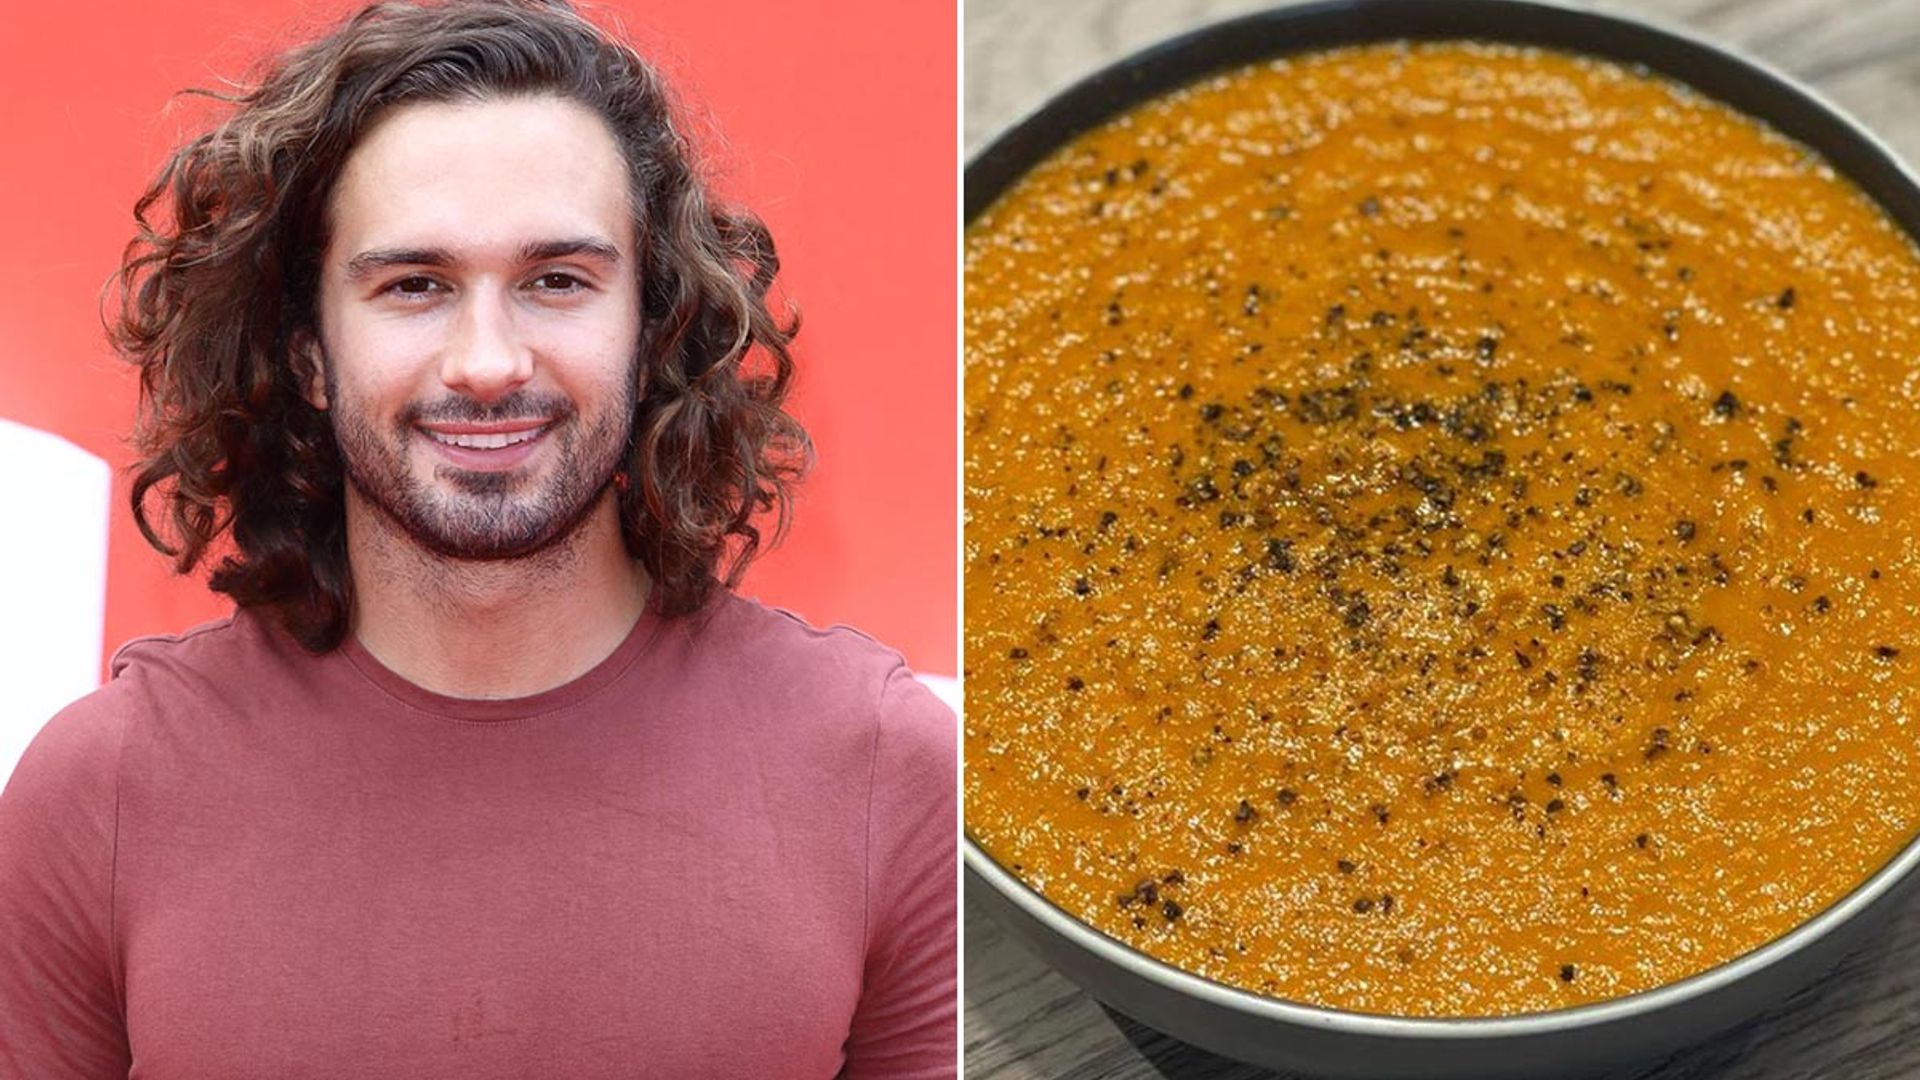 Joe Wicks' roasted vegetable soup recipe is our kind of lunch!